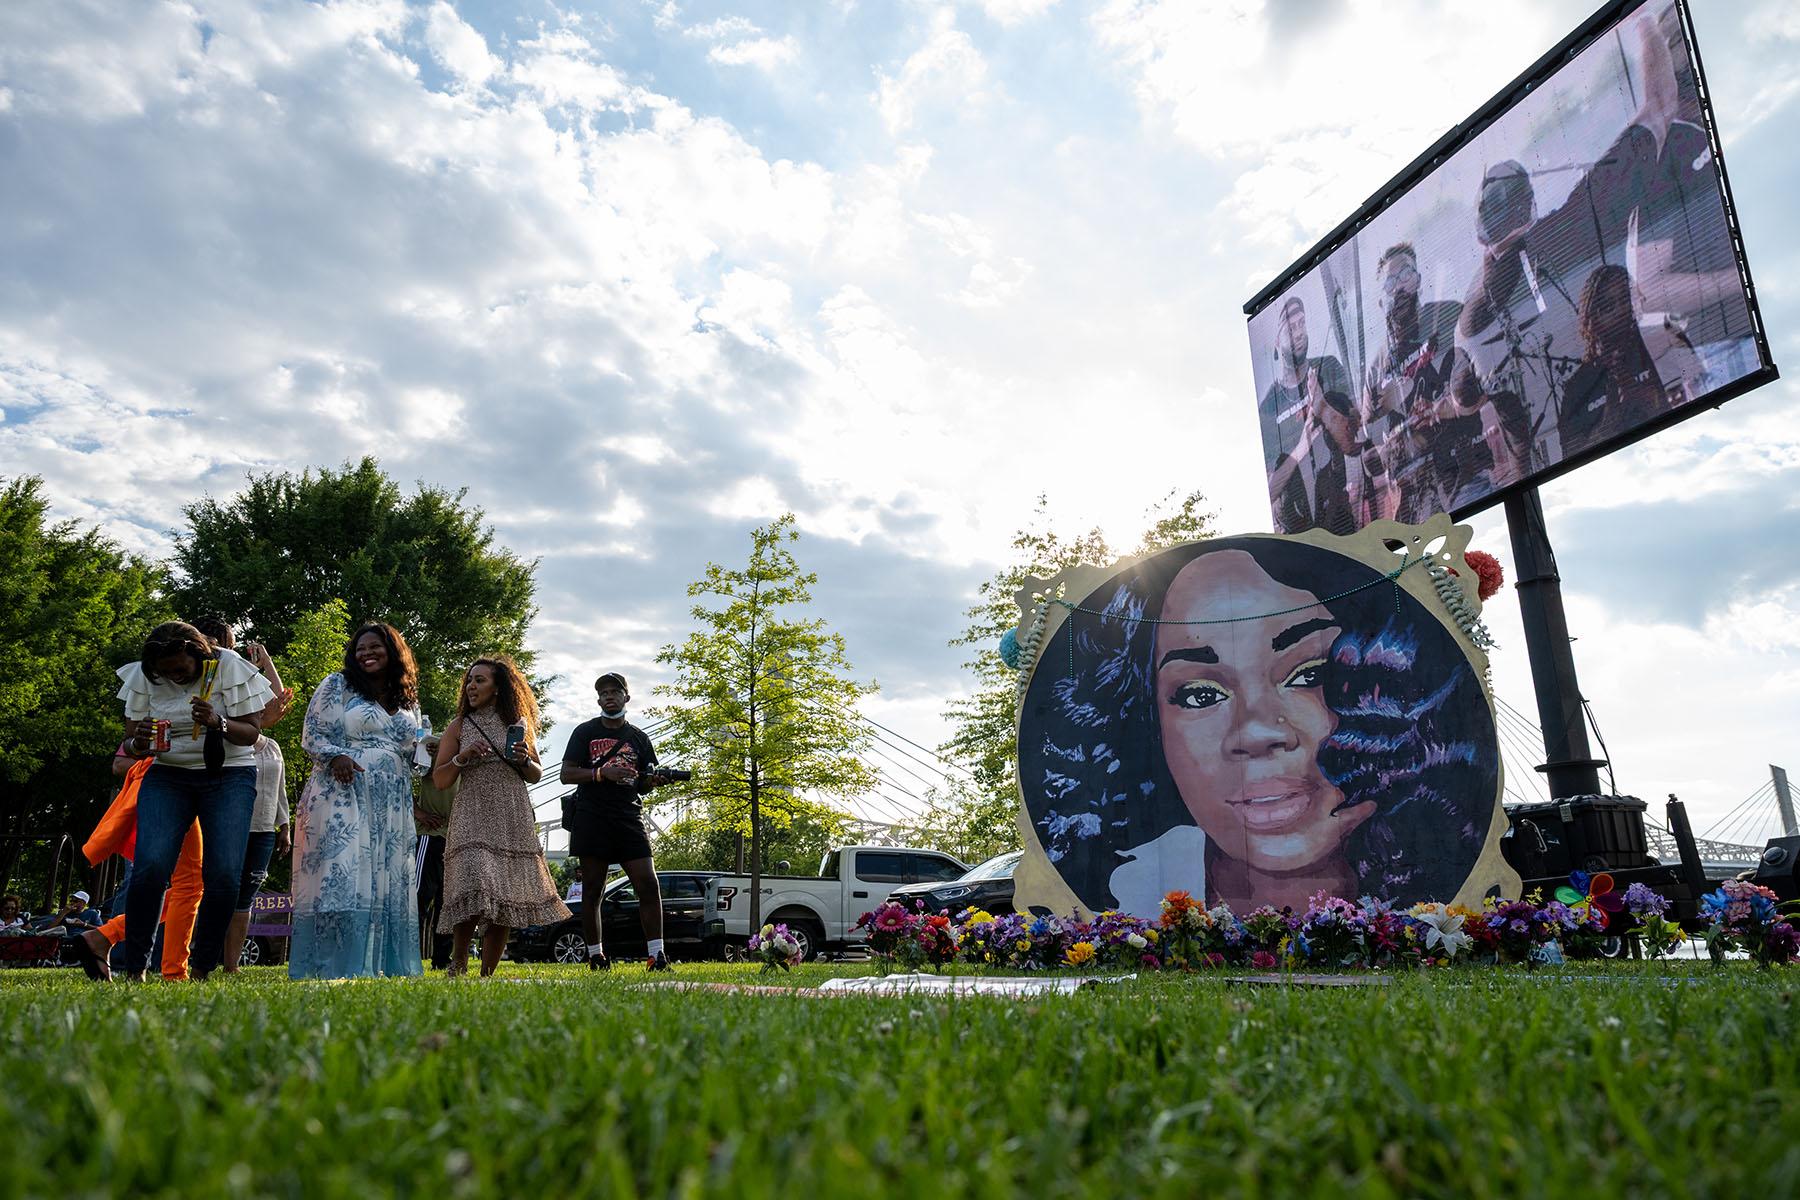 People stand near an art installation depicting Breonna Taylor at an event commemorating what would have been Breonna Taylor’s 28th birthday.